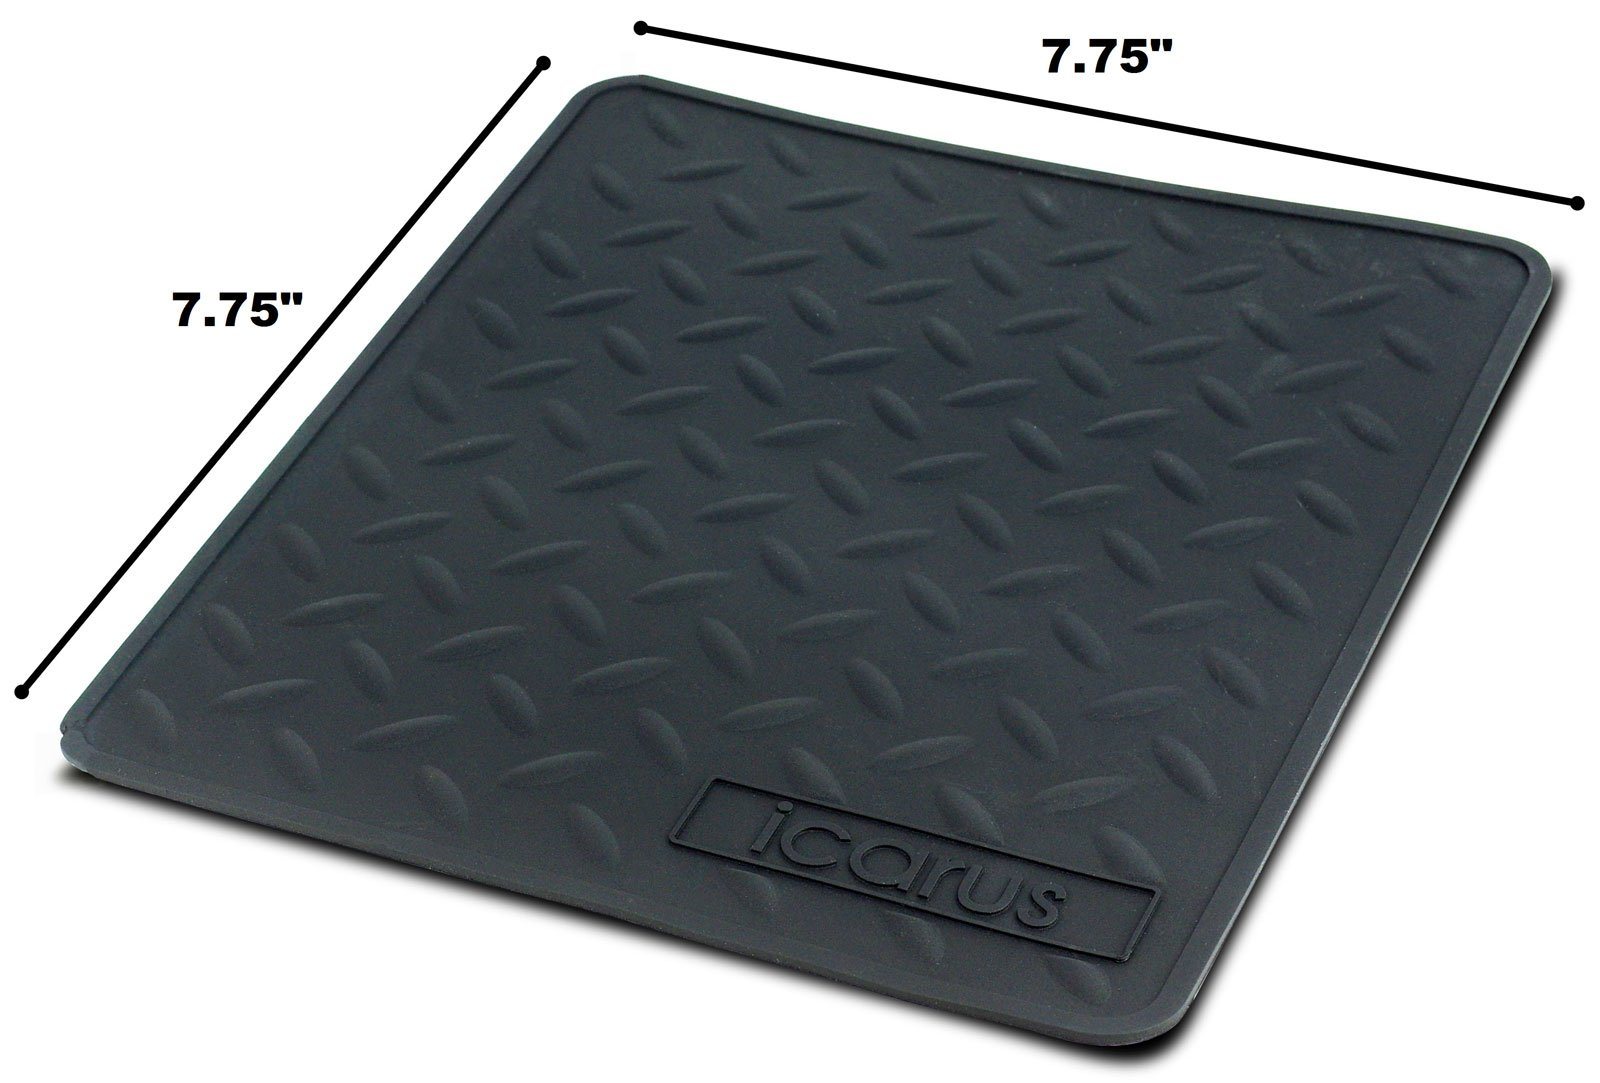 Large Silicone Mat 